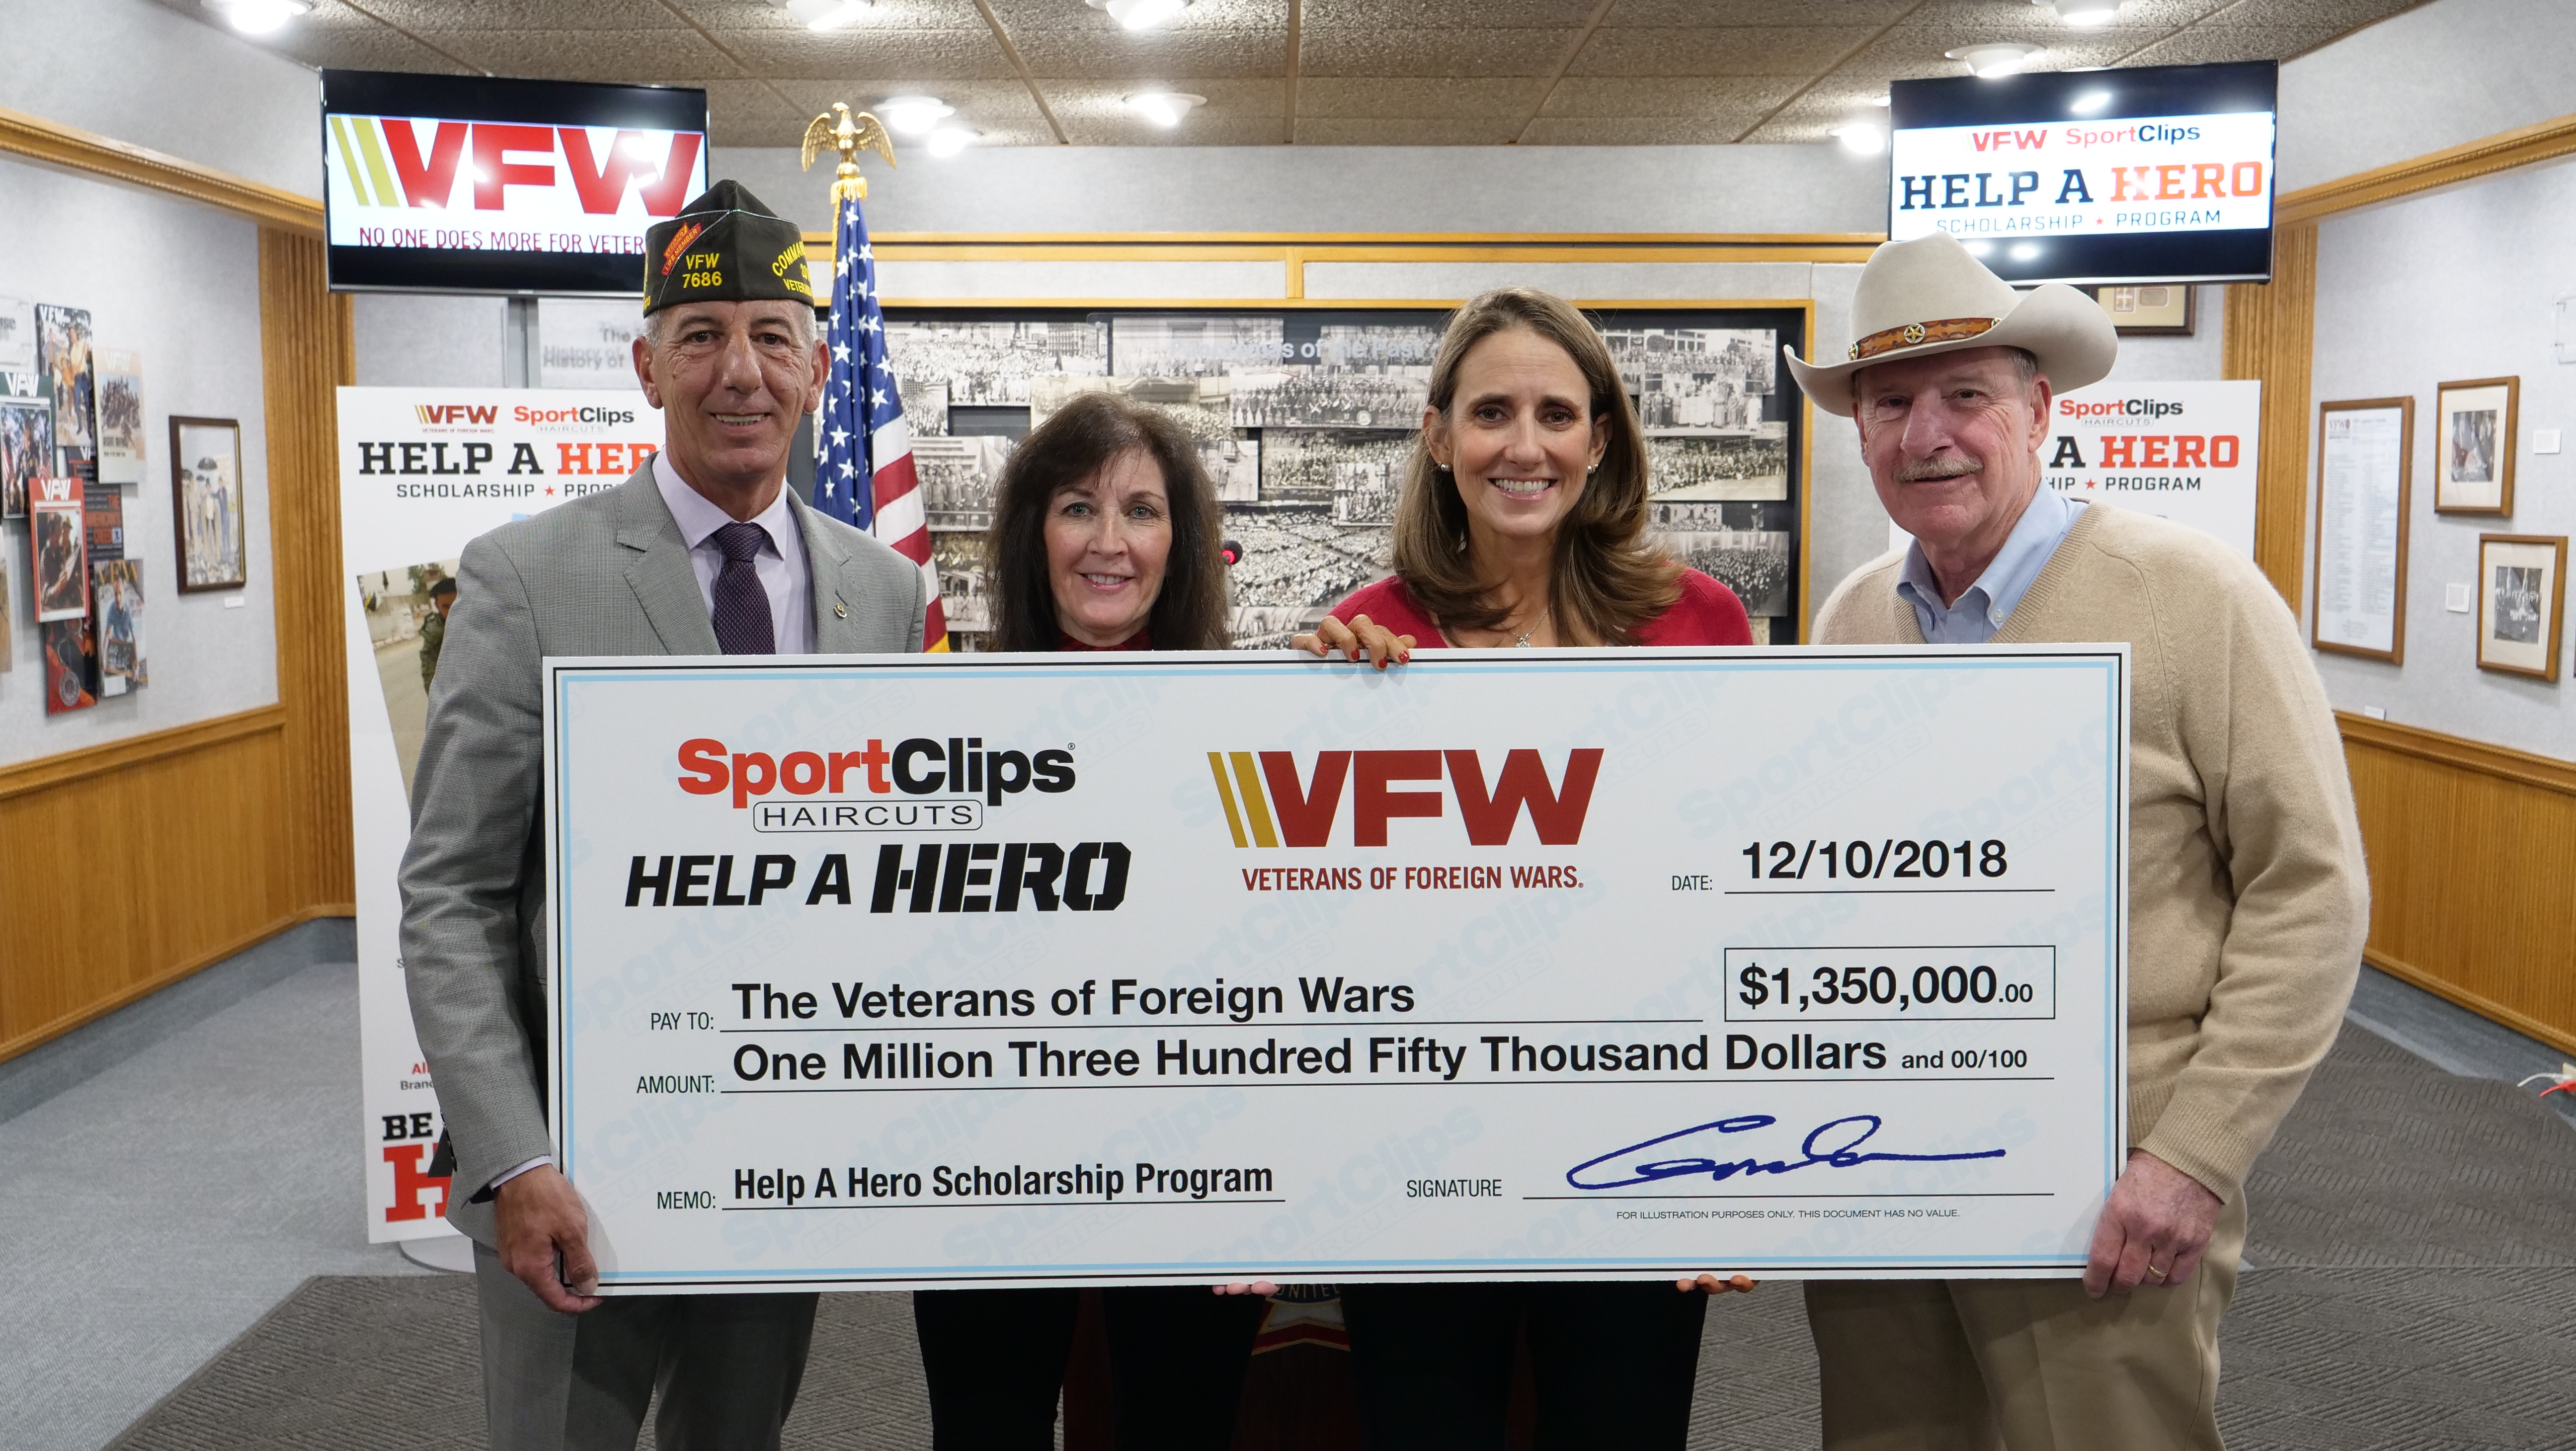 Sport Clips donates 1,350,000 to Veterans of Foreign Wars organization